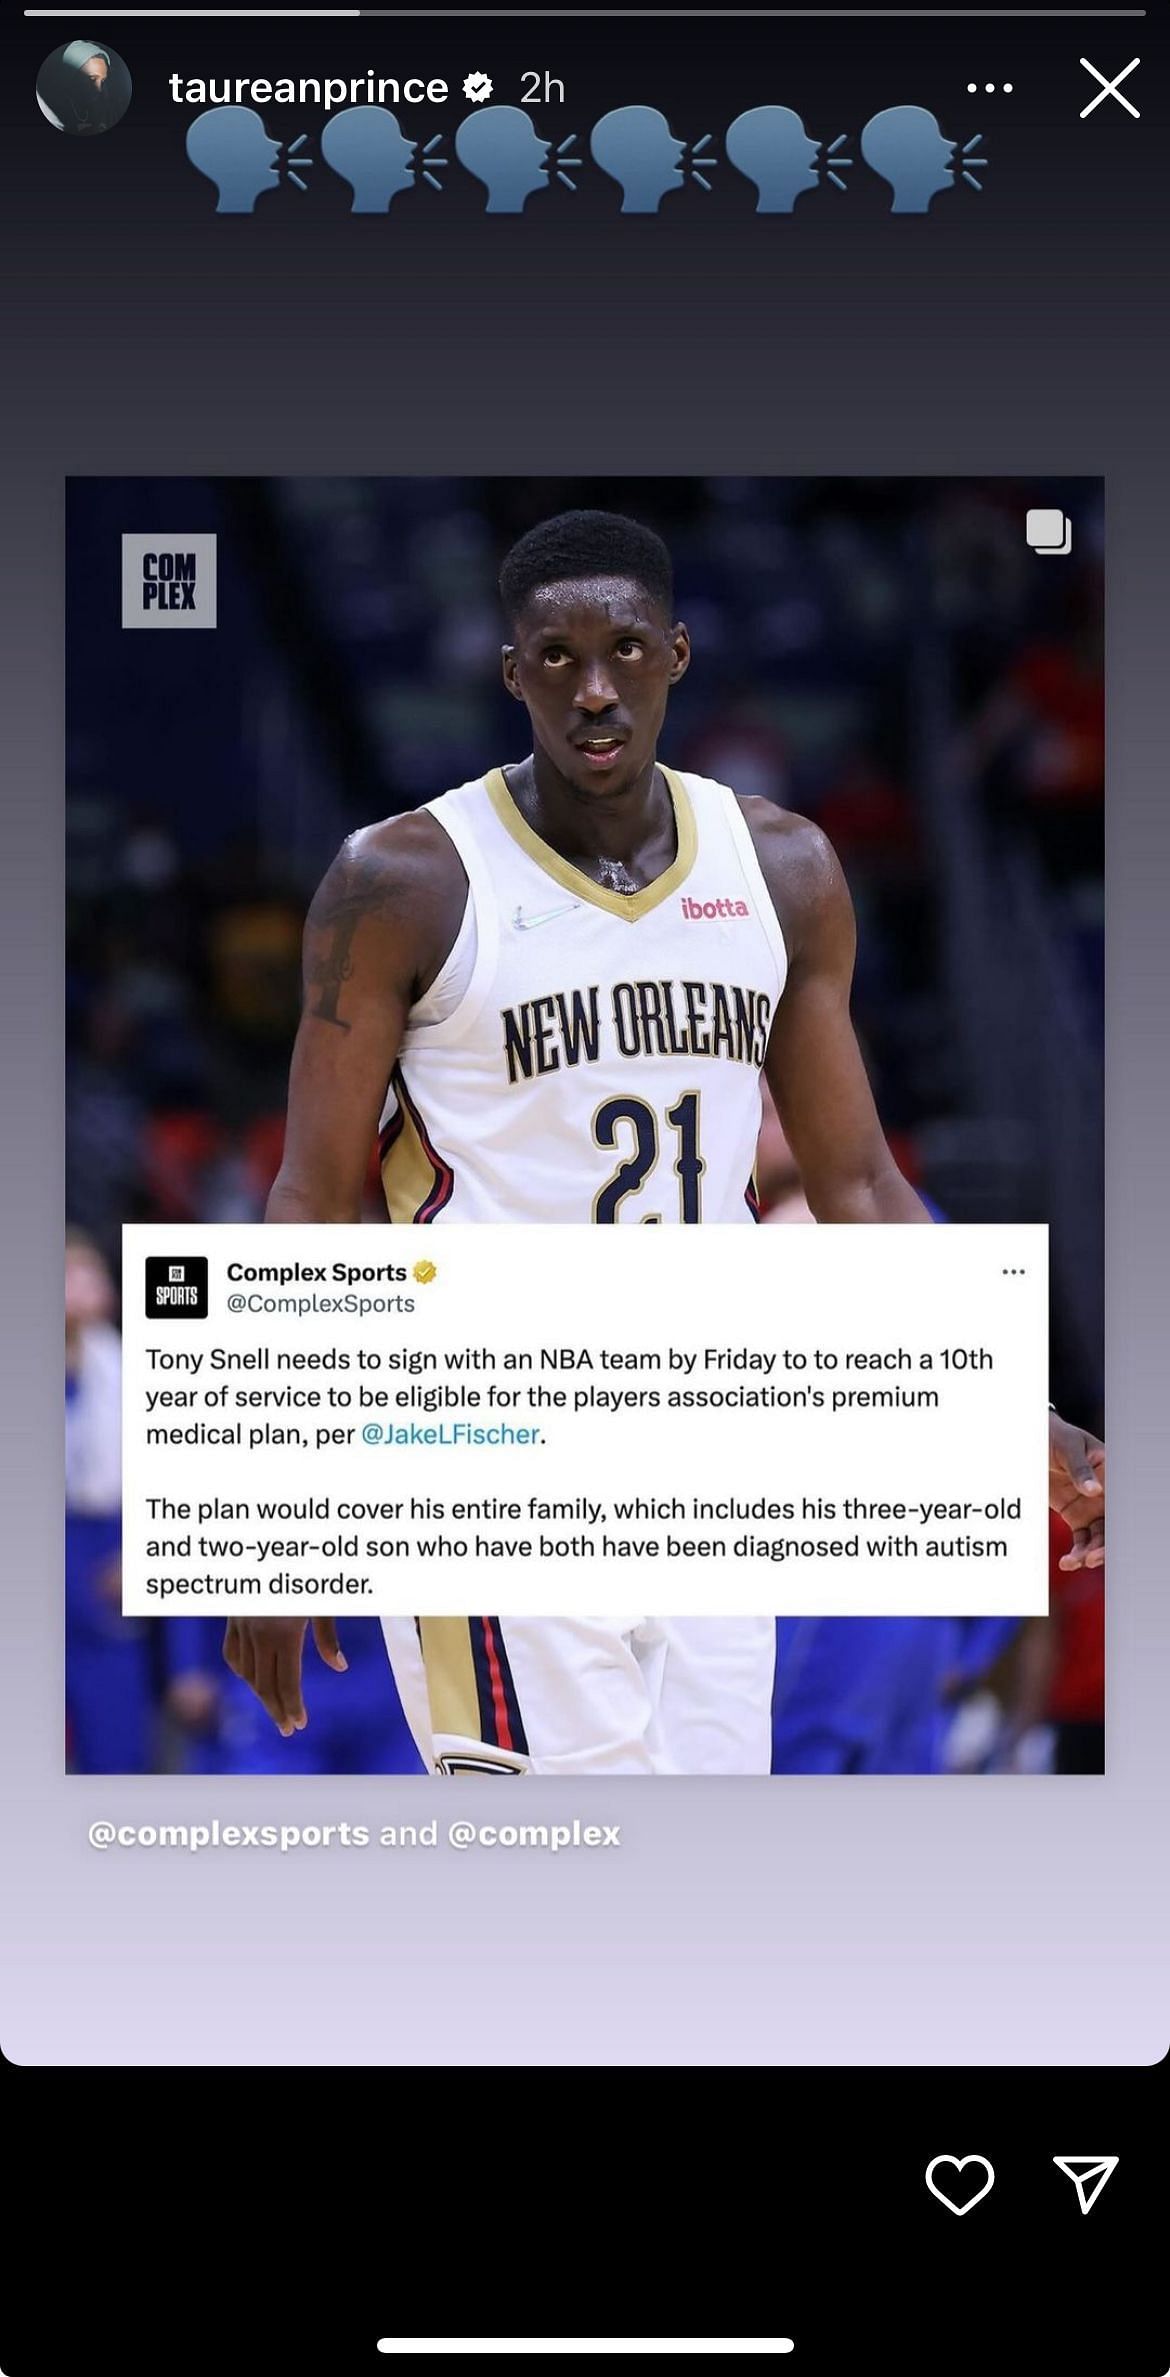 Taurean Prince wants the NBA to sign Tony Snell.